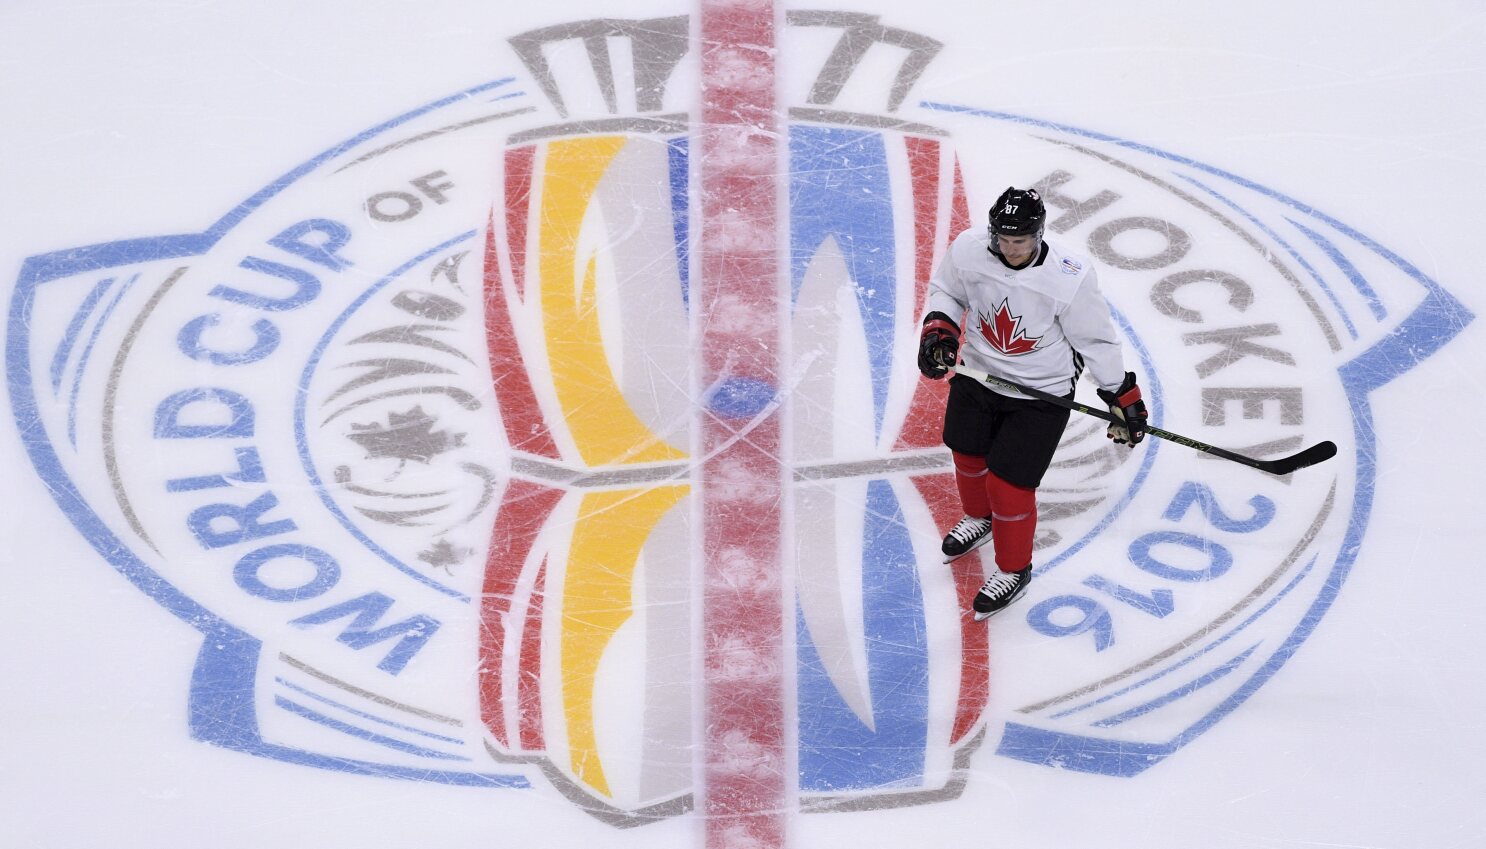 Why won't the NHL allow its players to go to the 2018 Winter Olympics?, NHL